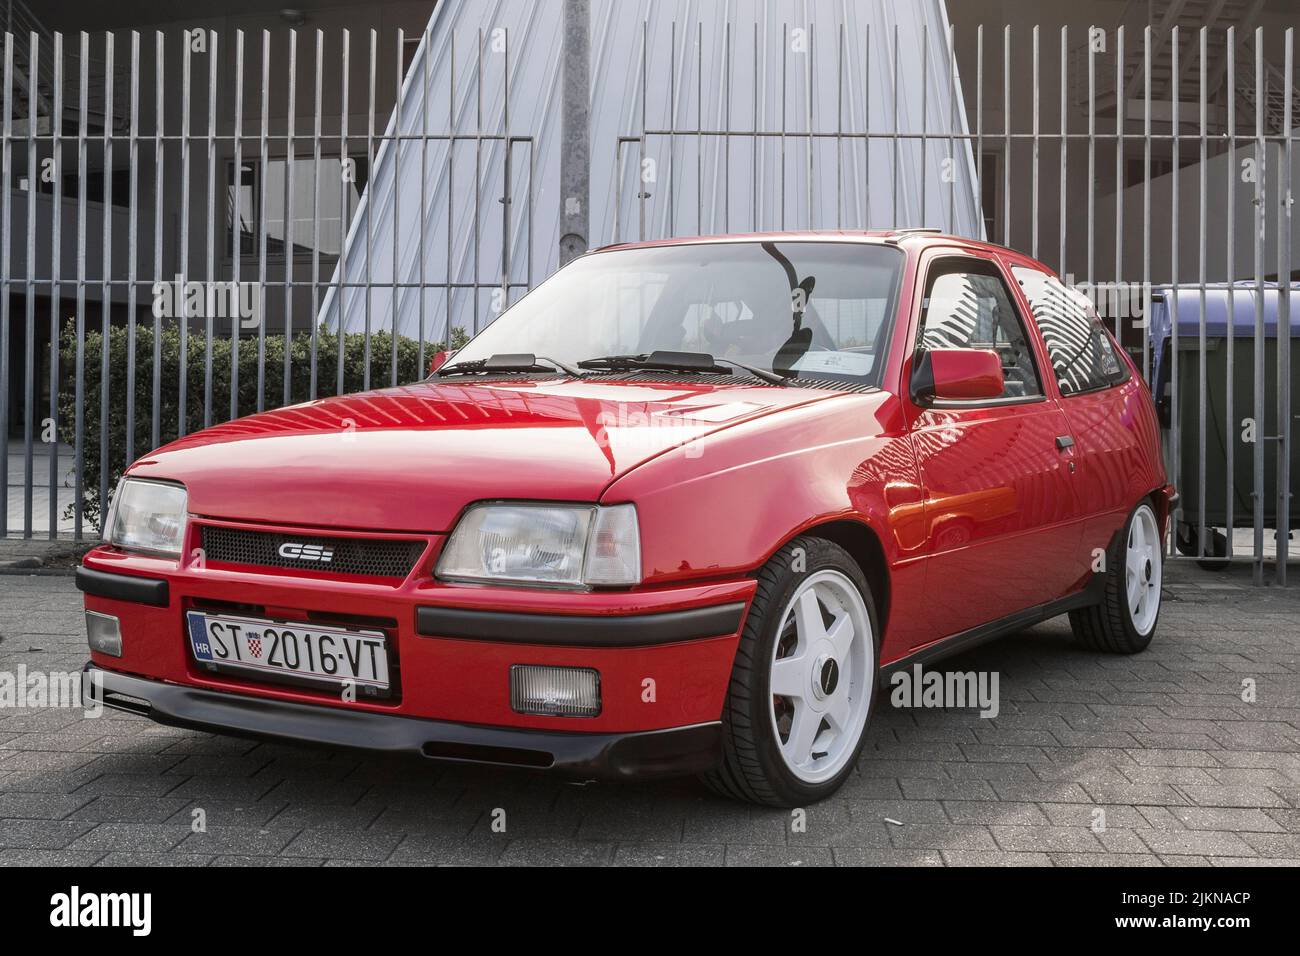 famous german 80s rally car Opel Kadett GSI displayed in classic car exhibition Stock Photo